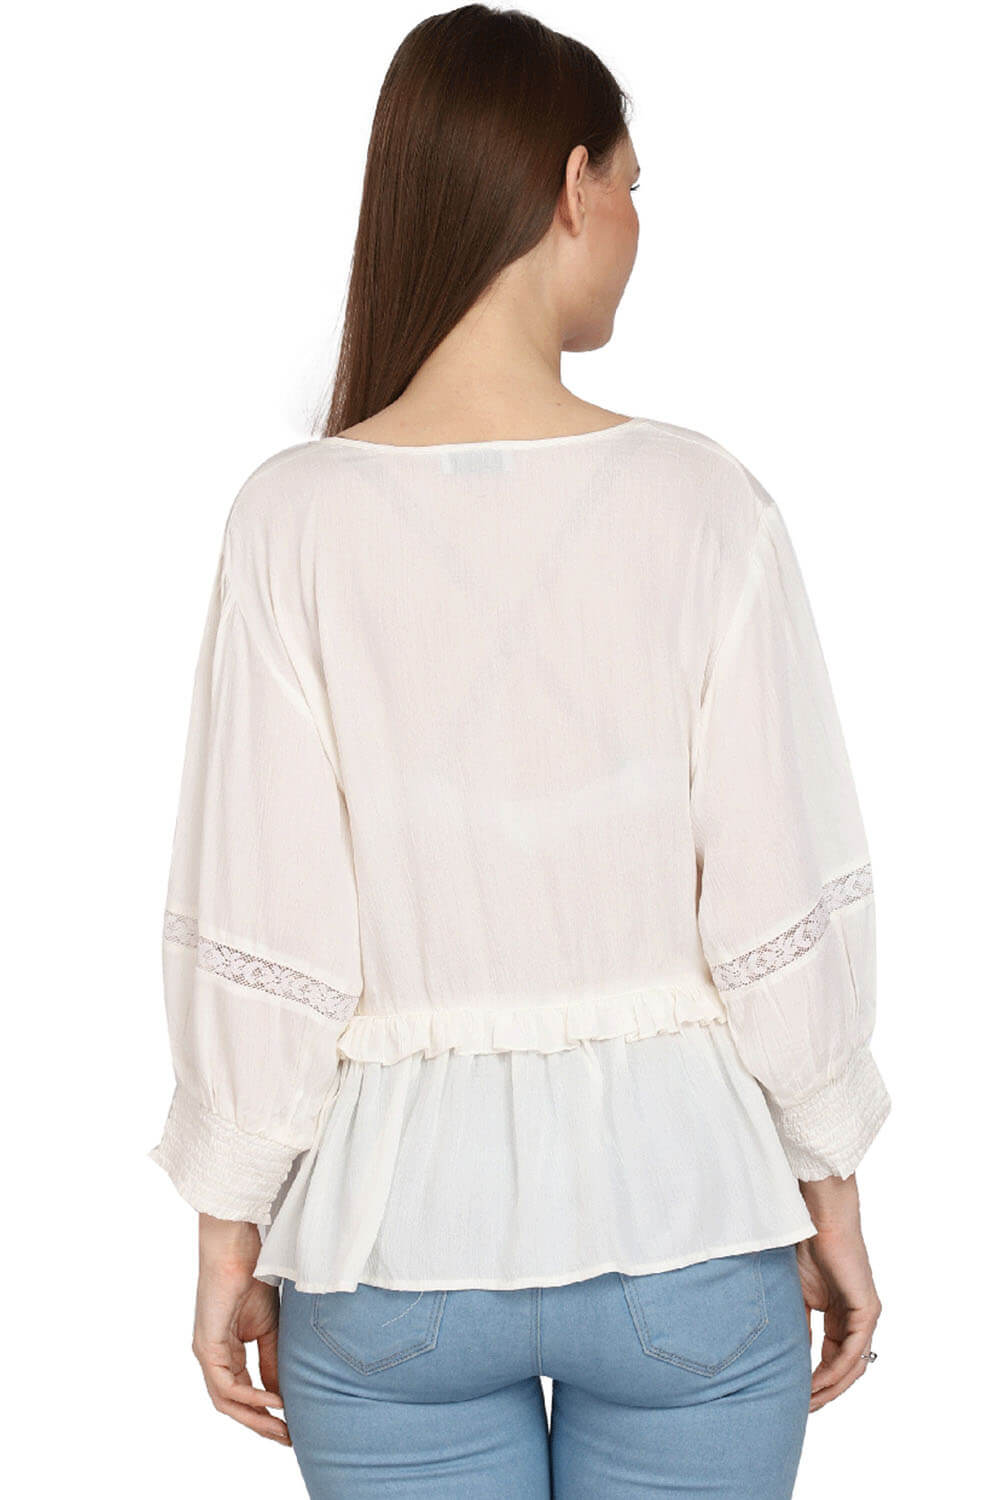 Timeless White Top with Button Open